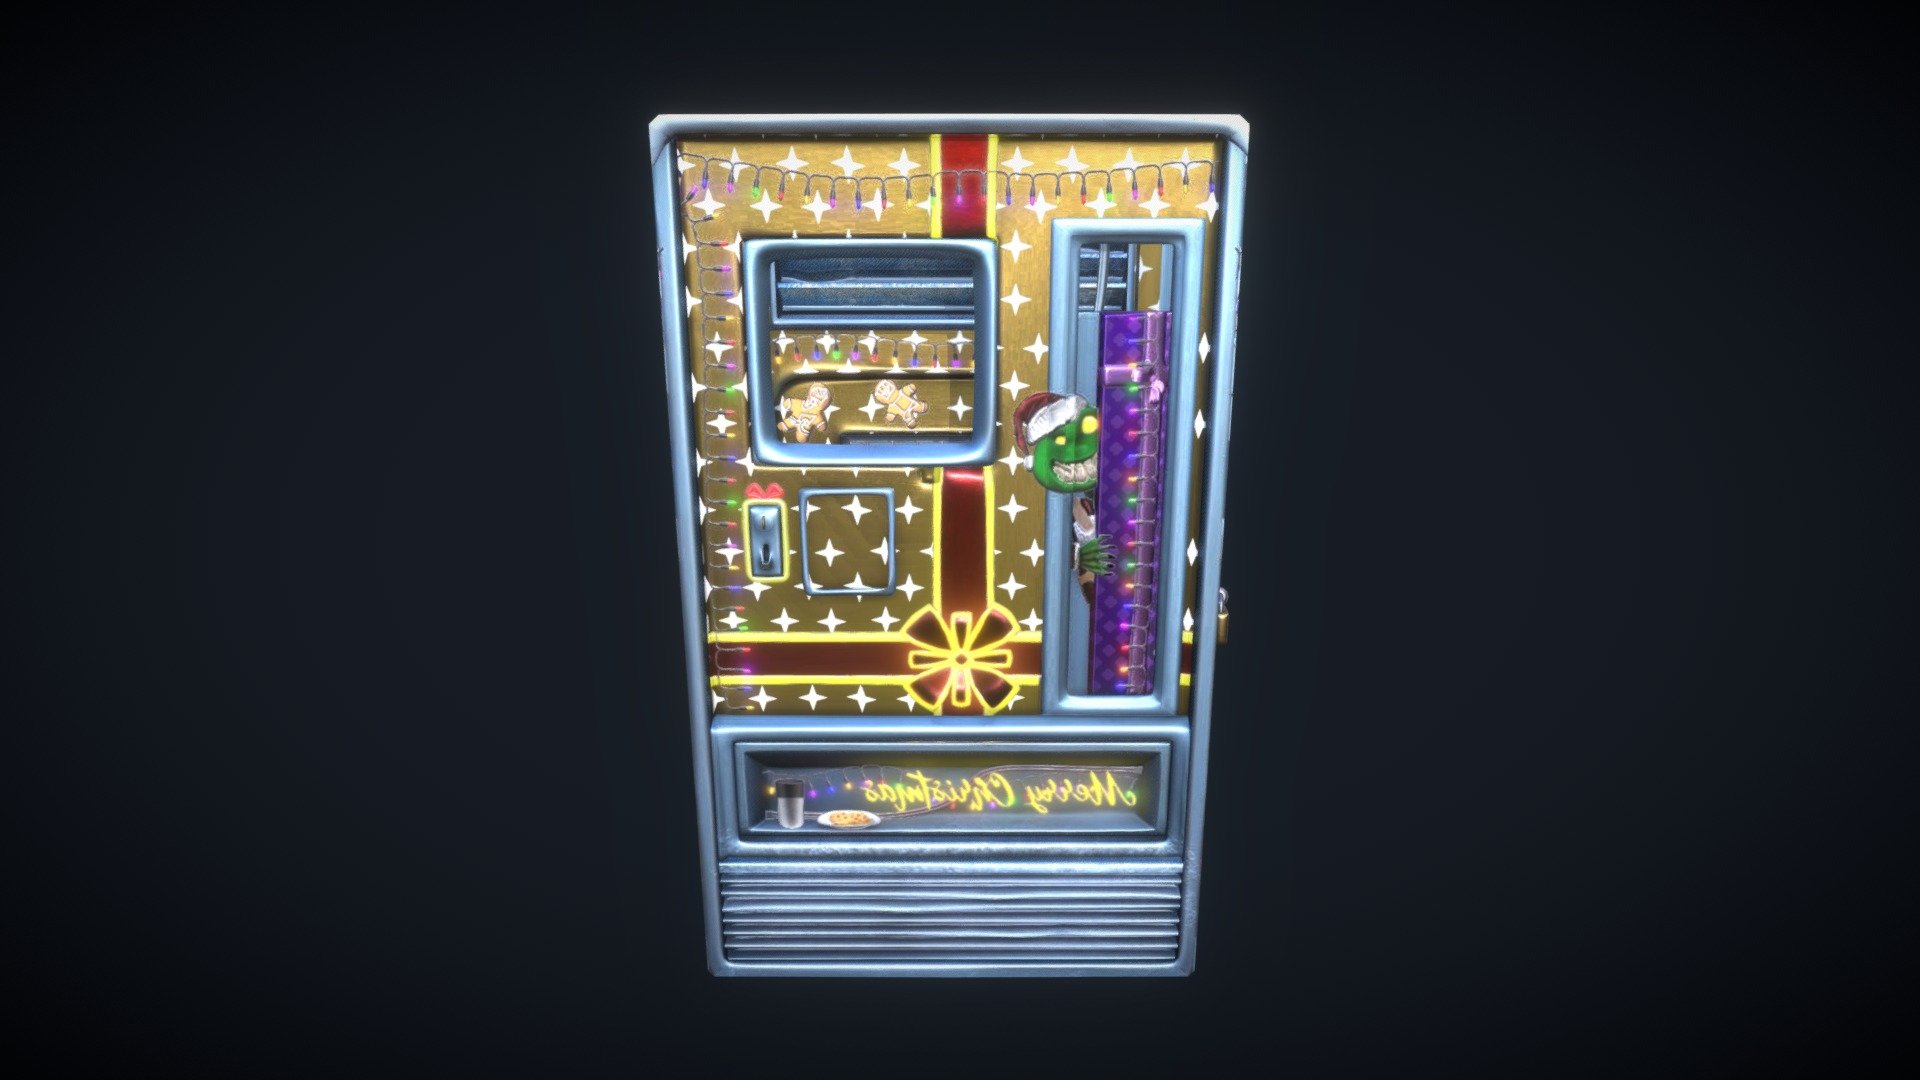 This is a skin for the gamr Rust, available on steam! Here's the link for it on the workshop if you feel like giving it an upvote: https://steamcommunity.com/sharedfiles/filedetails/?id=2678331636 Thank you! - Christmas Goblin Vending Machine (Rust Workshop) - 3D model by deoxygen 3d model